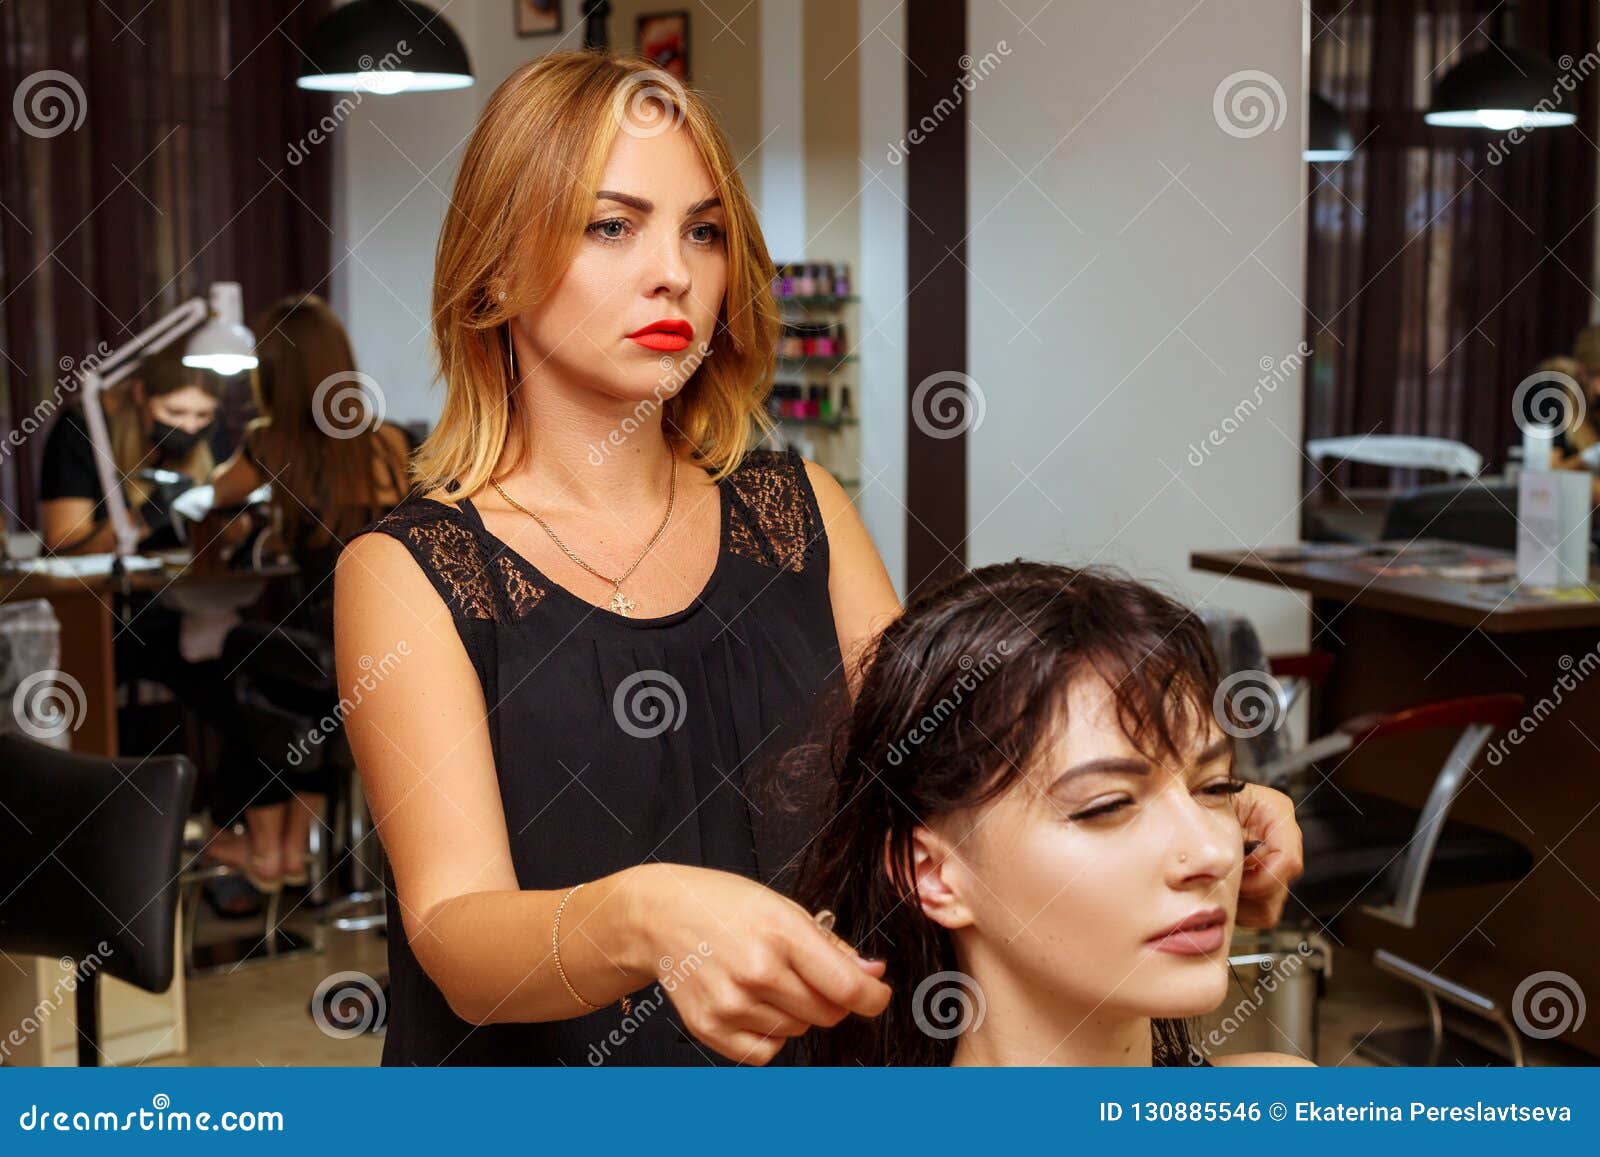 Hairdresser and Client in the Salon, Beauty Salon and Hair Care Stock